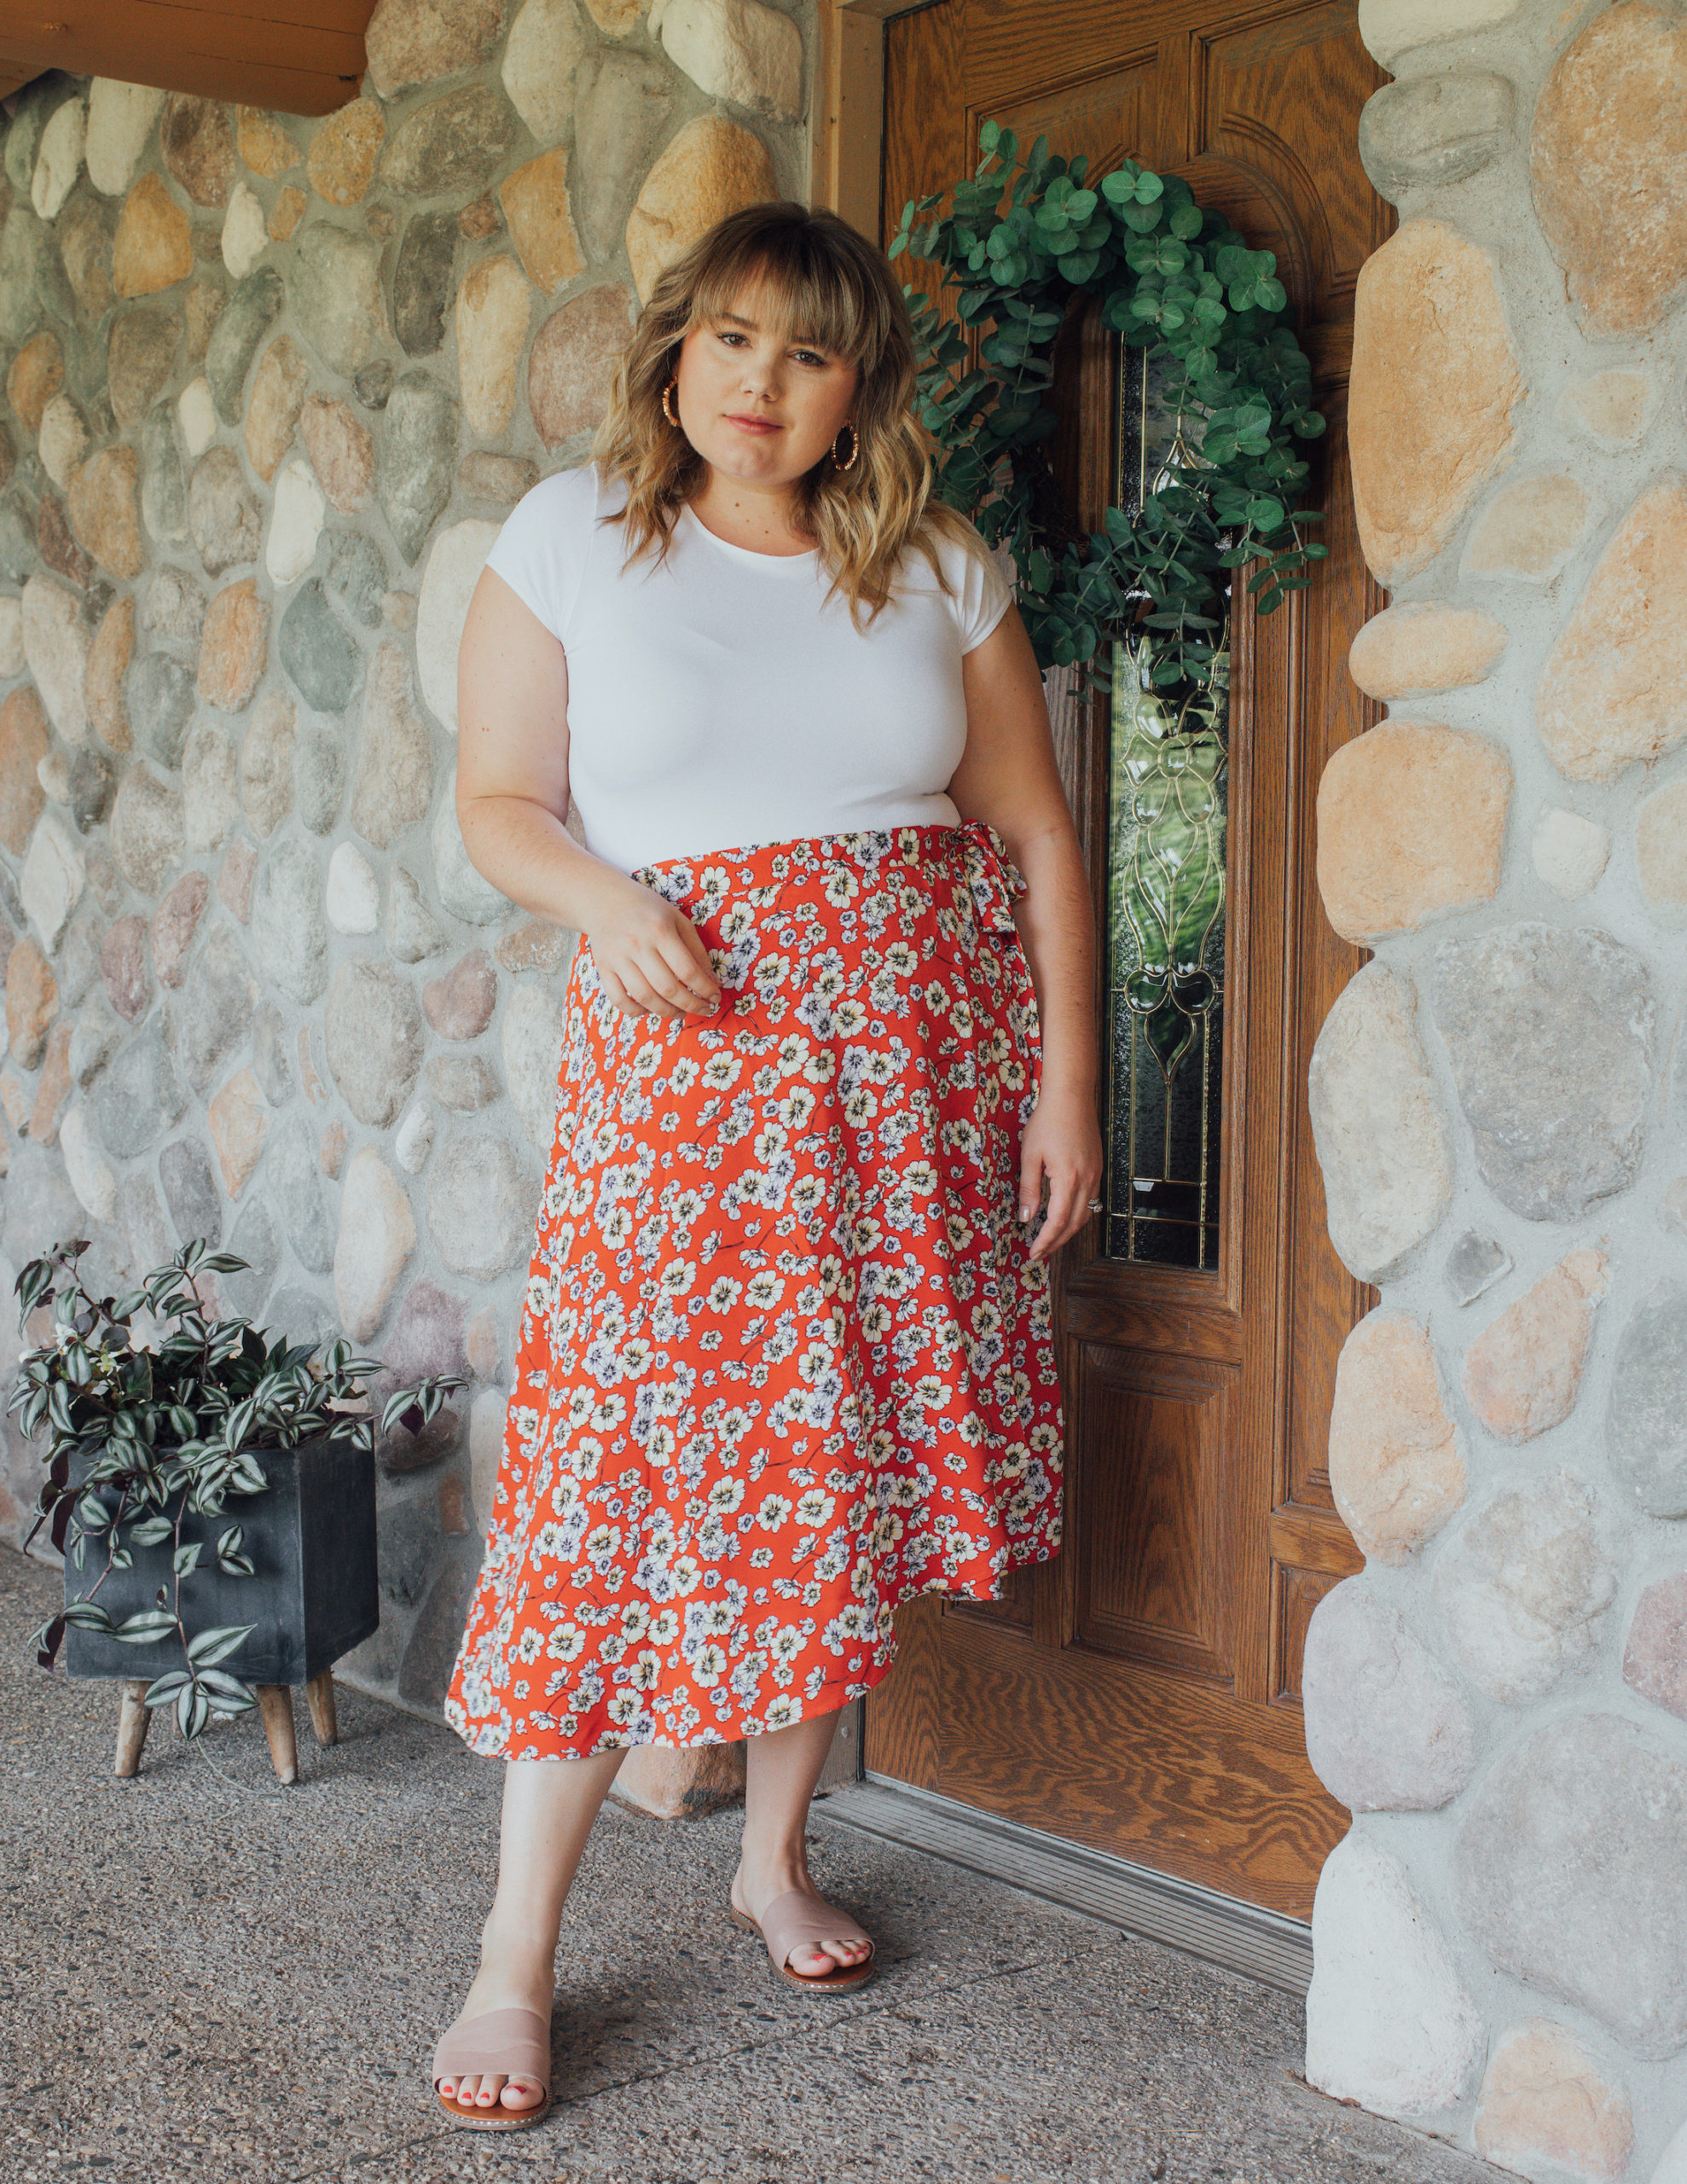 Sharing a fab plus size bodysuit + skirt from Walmart on the blog! Get this entire outfit for $60, what a steal!